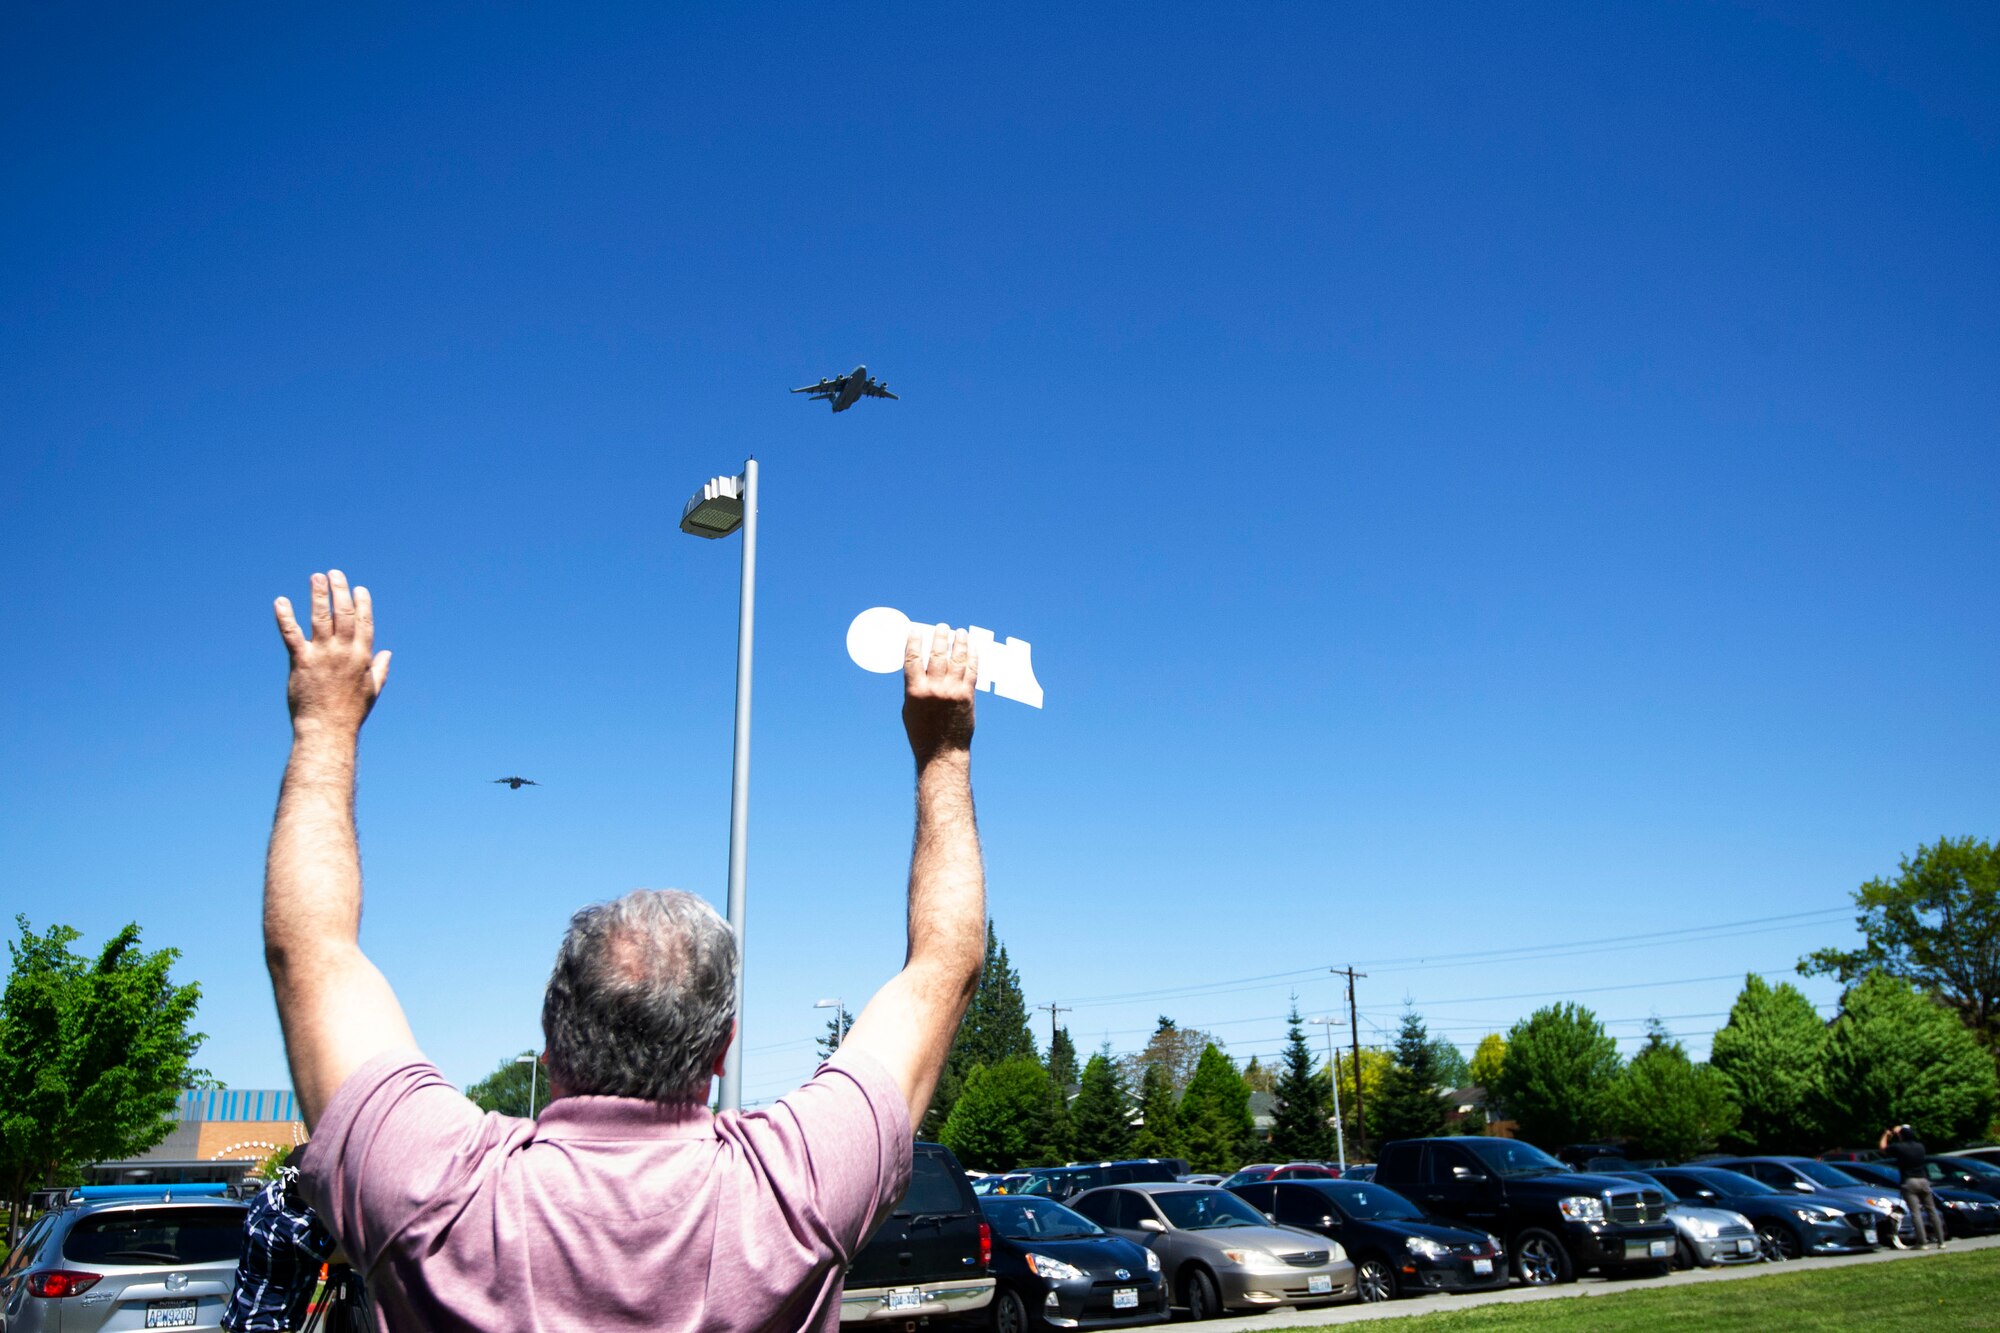 A Providence Regional Medical Center employee waves his hands at the two-ship C-17 Globemaster III formation May 8, 2020 in Everett, Washington. The 62nd Airlift Wing, based out of Joint Base Lewis-McChord, Wash., saluted American heroes who are on the frontline in the fight against COVID-19 with a morale flyover in the state’s Puget Sound region. In January, Providence was the first U.S. hospital to report a COVID-19 case. (U.S. Air Force photo by Maj Candice Allen)